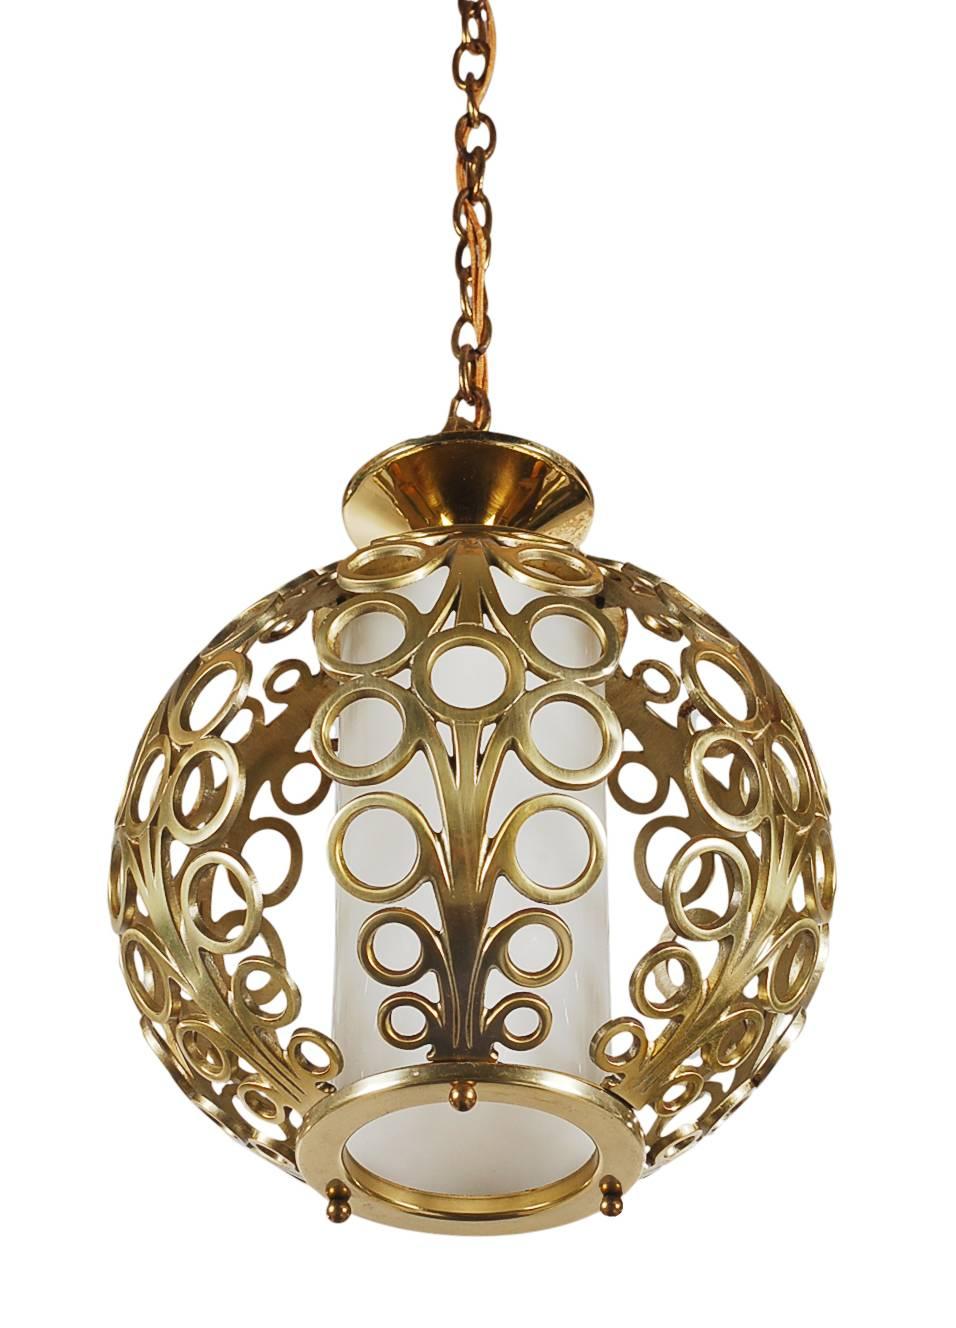 A beautifully designed brass pendant lamp, circa 1960s. It features solid brass construction with a glossy milk glass center diffuser. Tested, working, and ready for immediate use. 

In the style of: Tommi Parzinger, James Mont, Dorothy Draper.
 